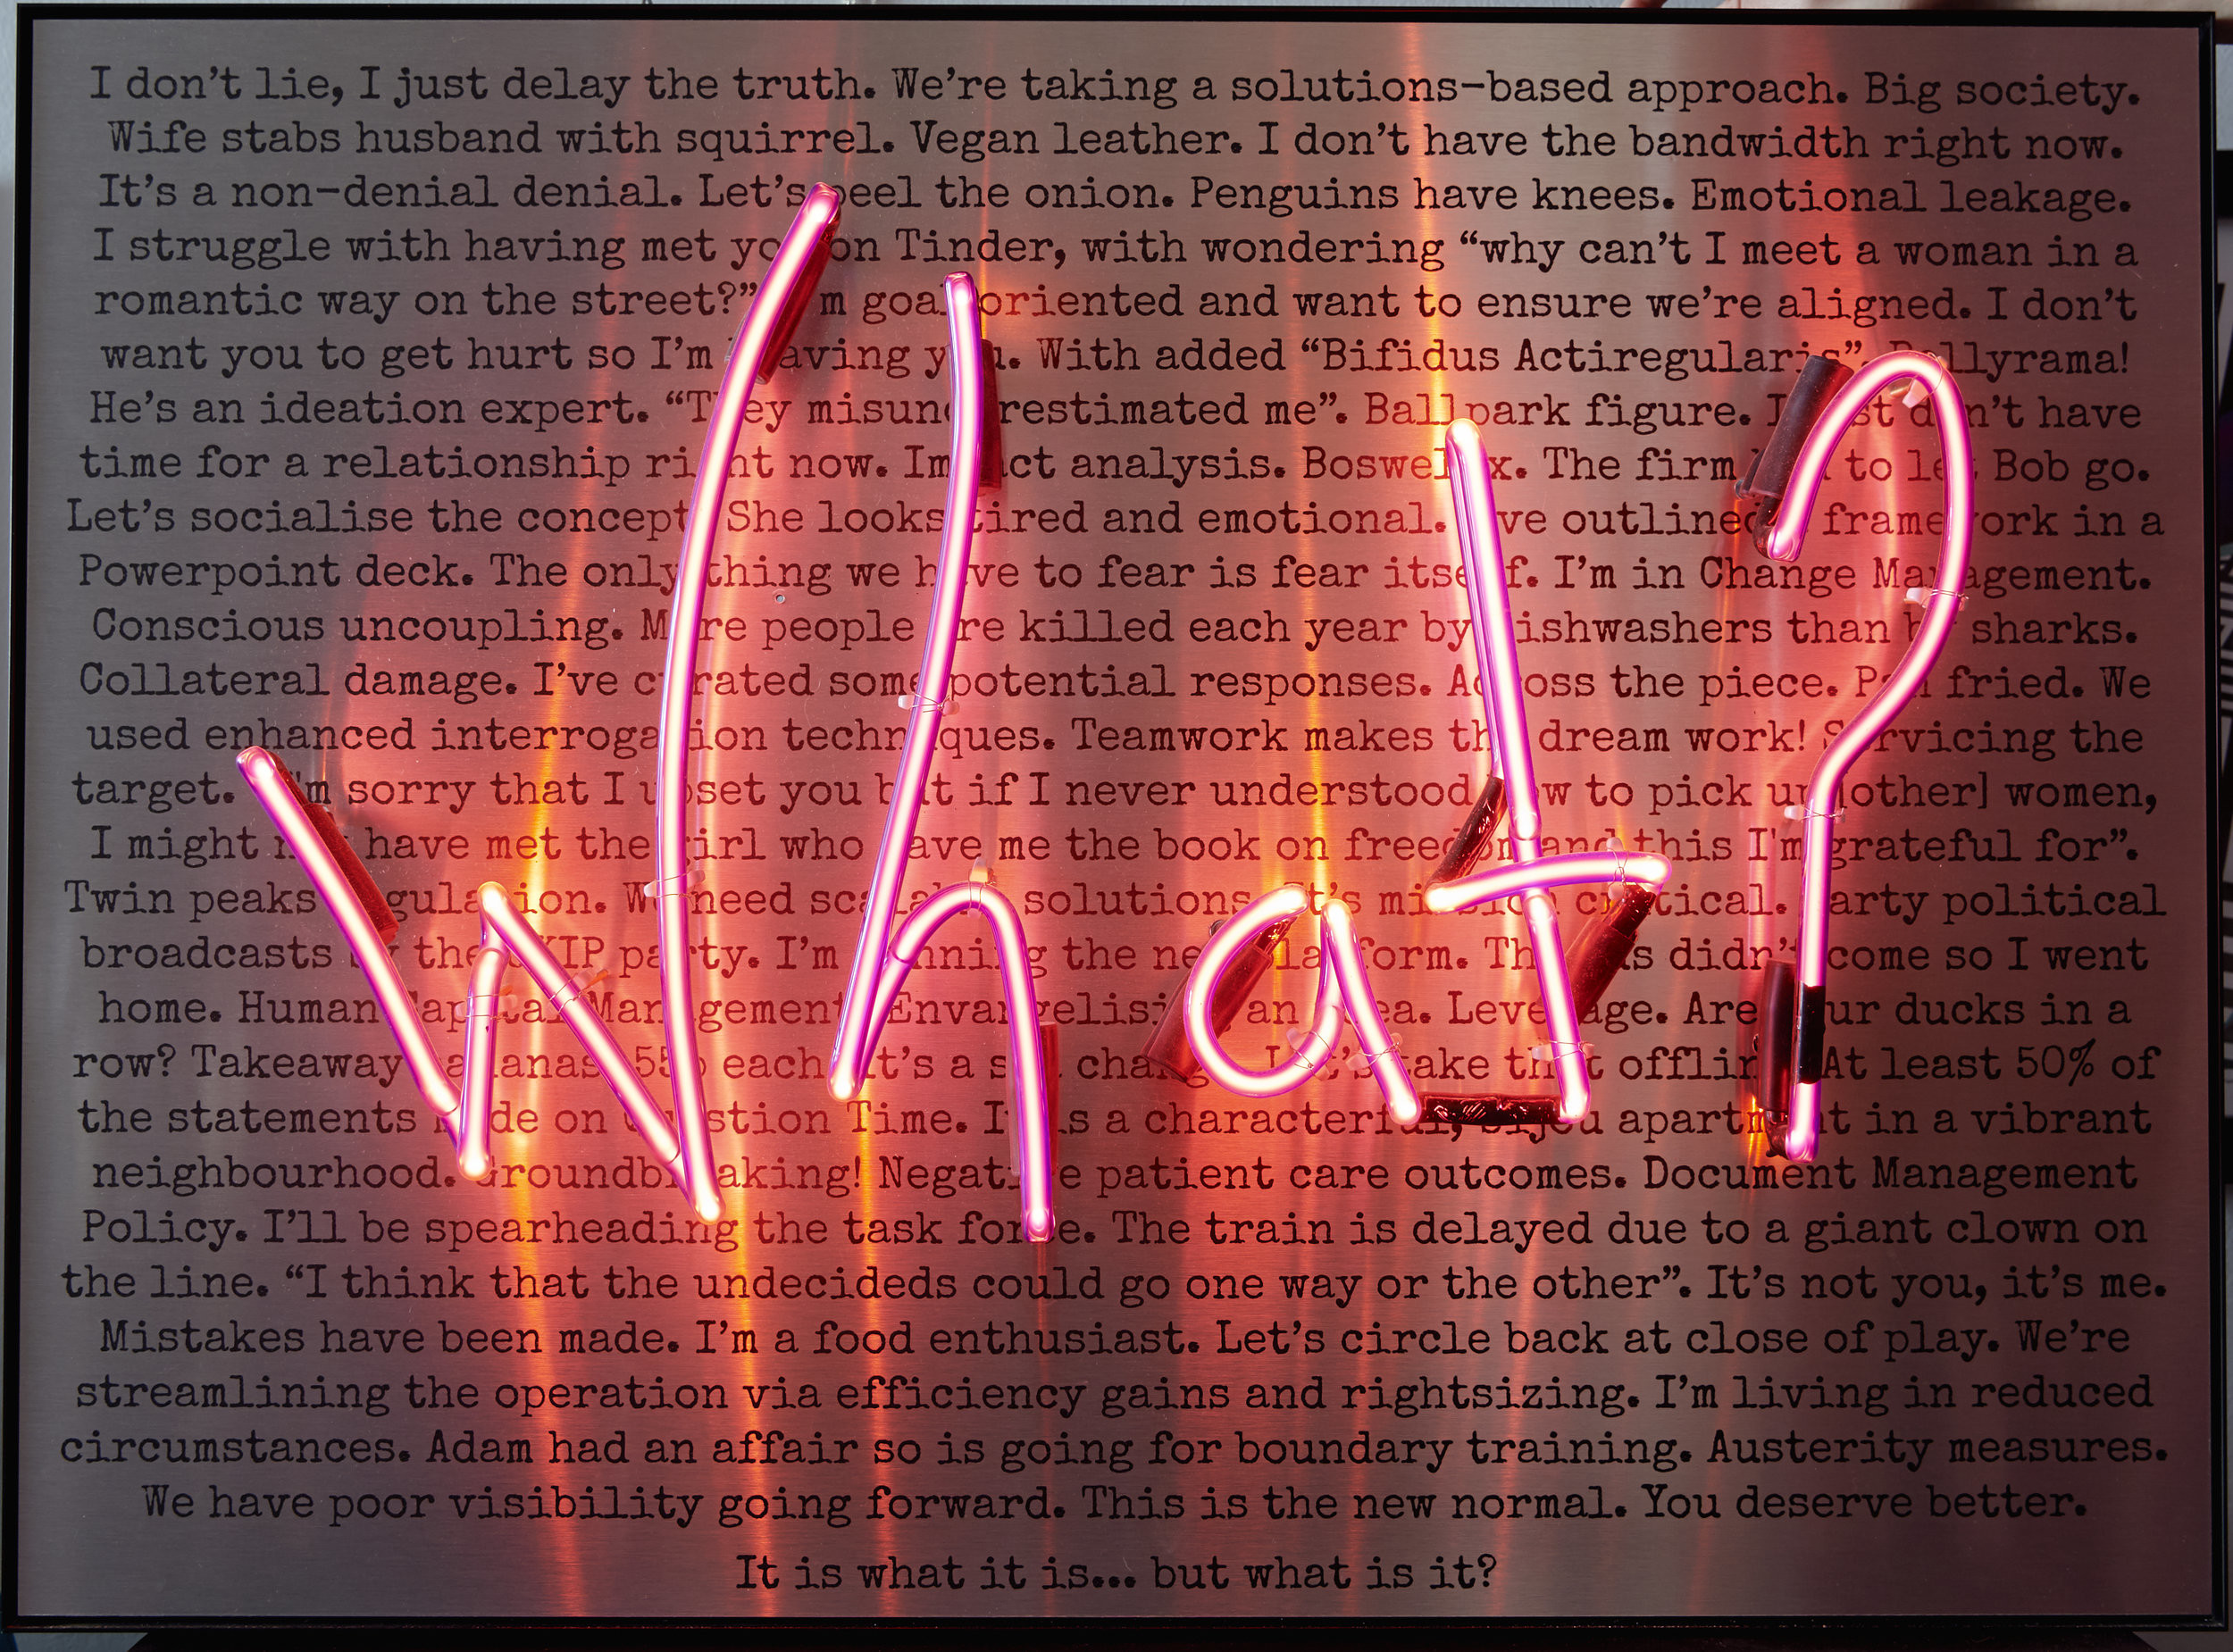 2500x1850 Neon light - Do You Hear Yourself When You Speak? (what) - brushed  aluminium background version